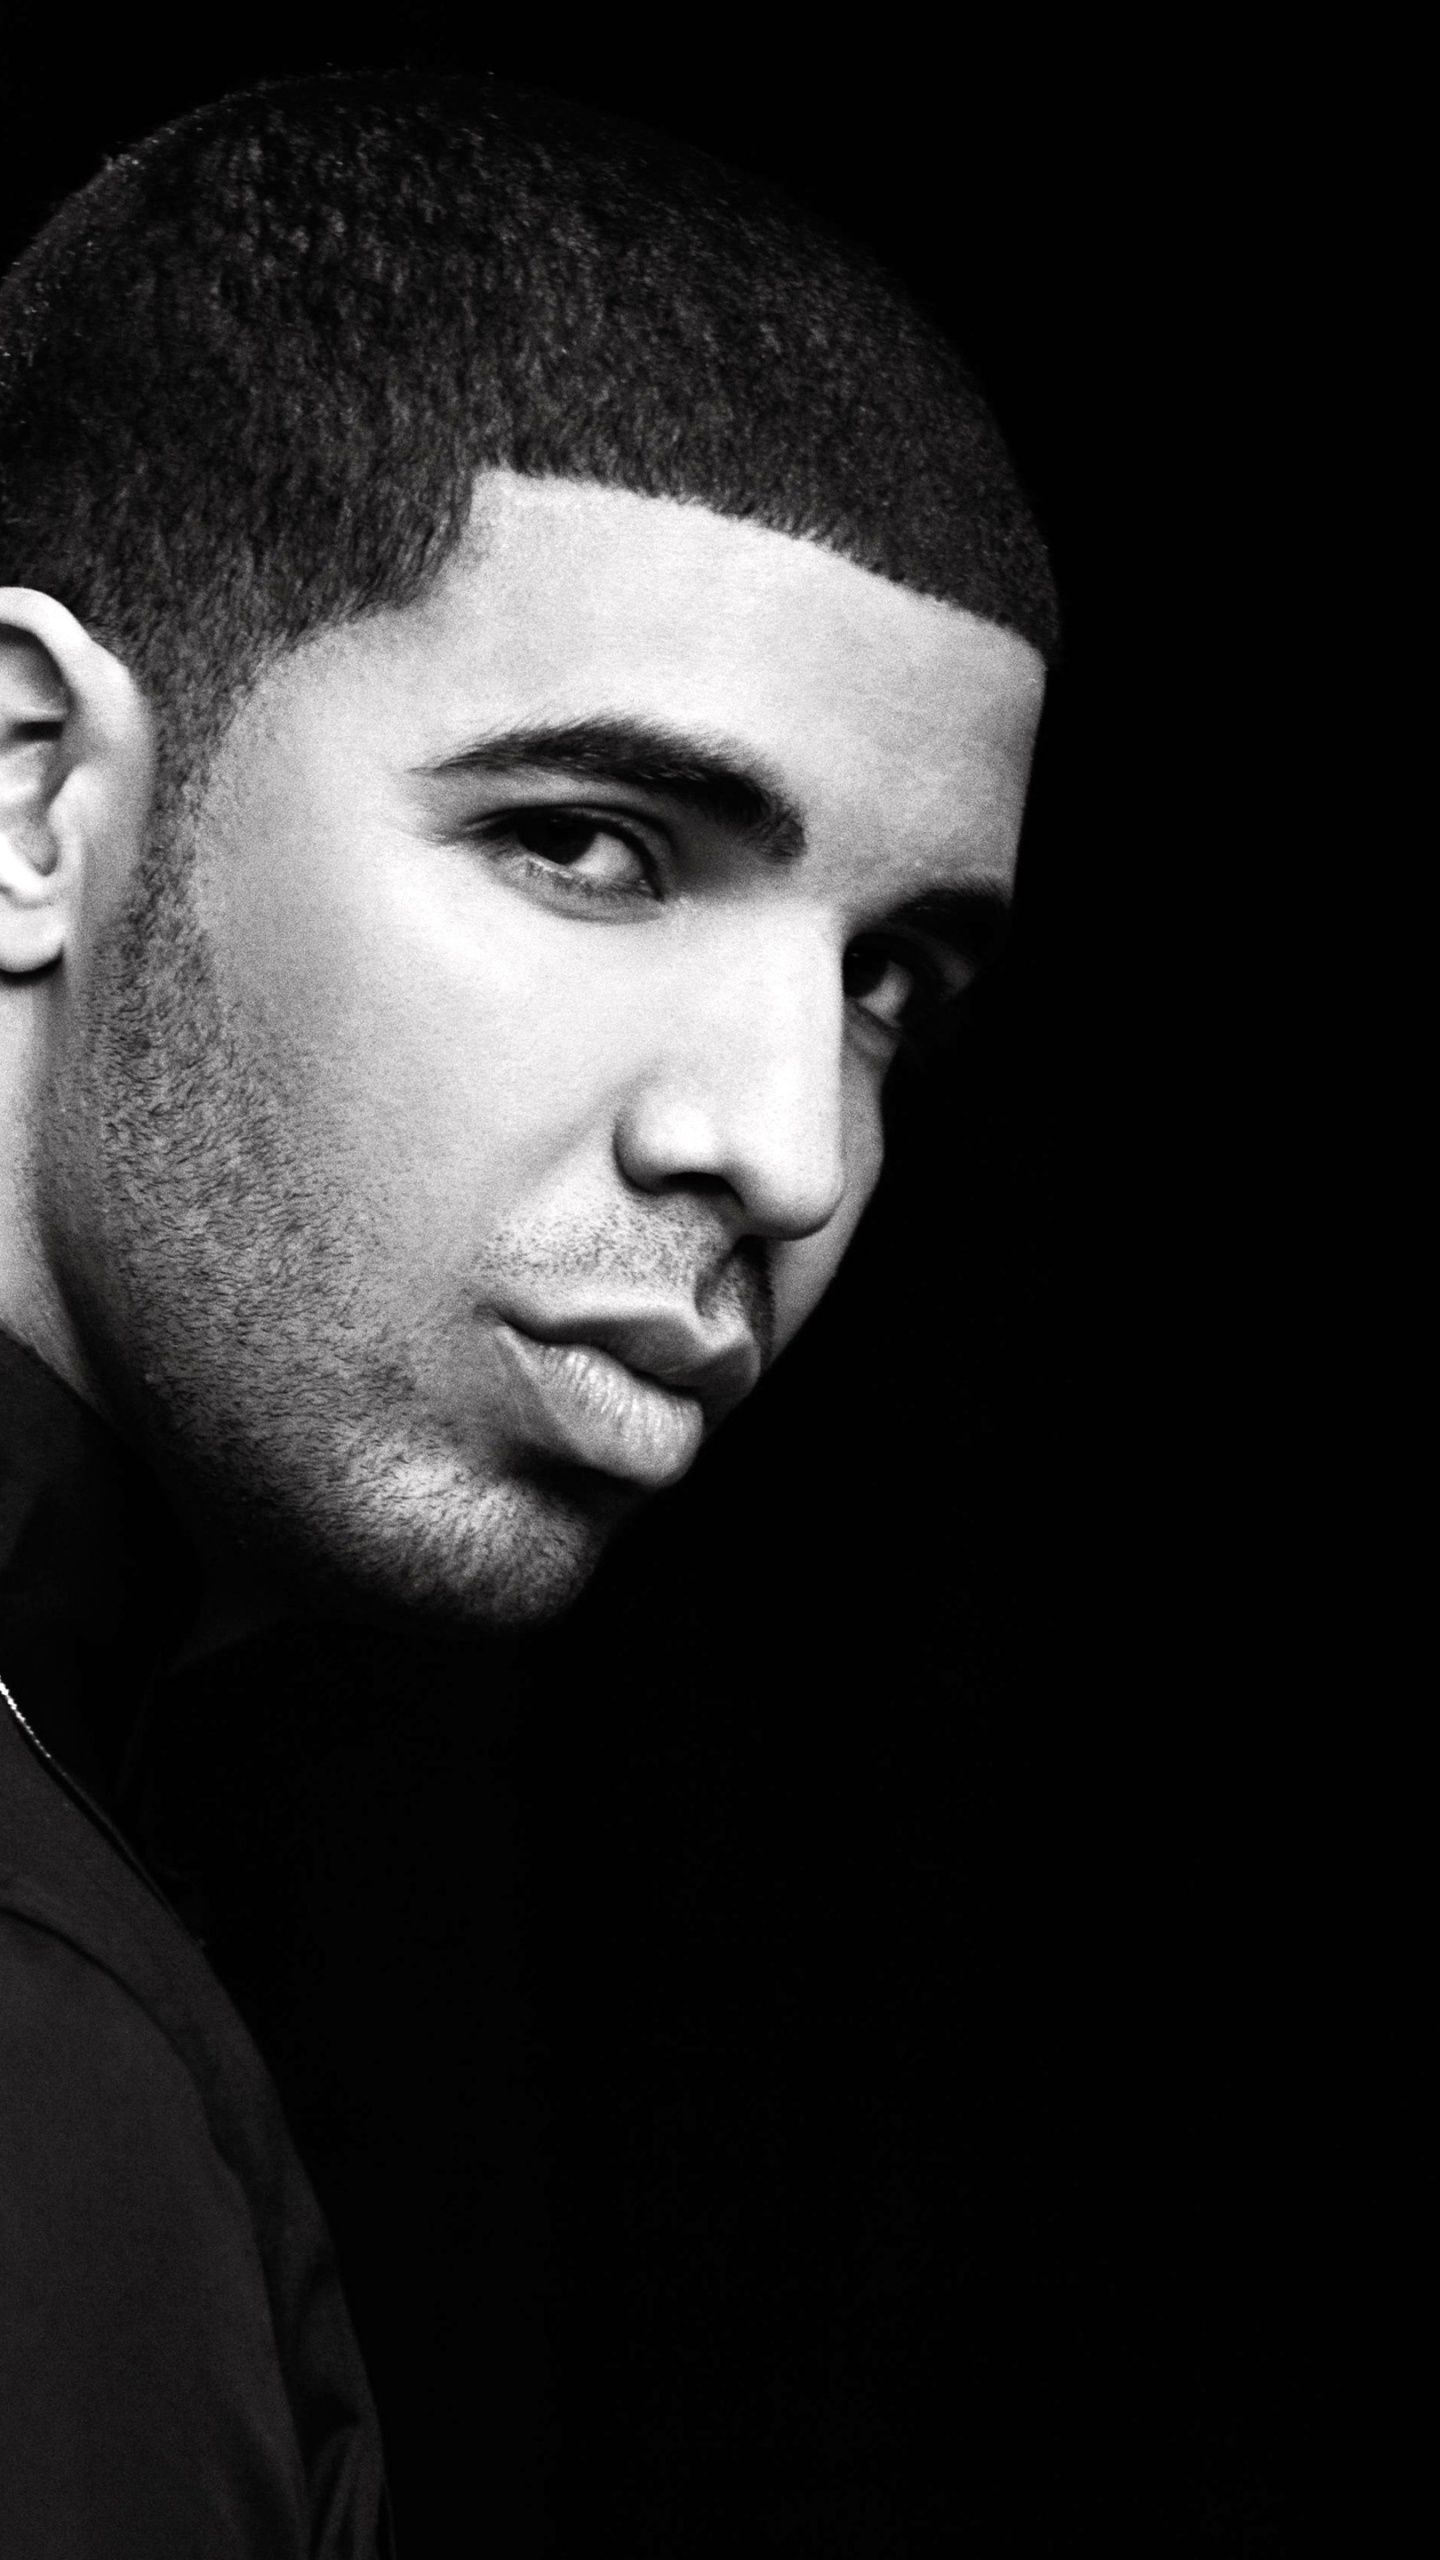 Drake wallpaper for iPhone and Android. - Drake